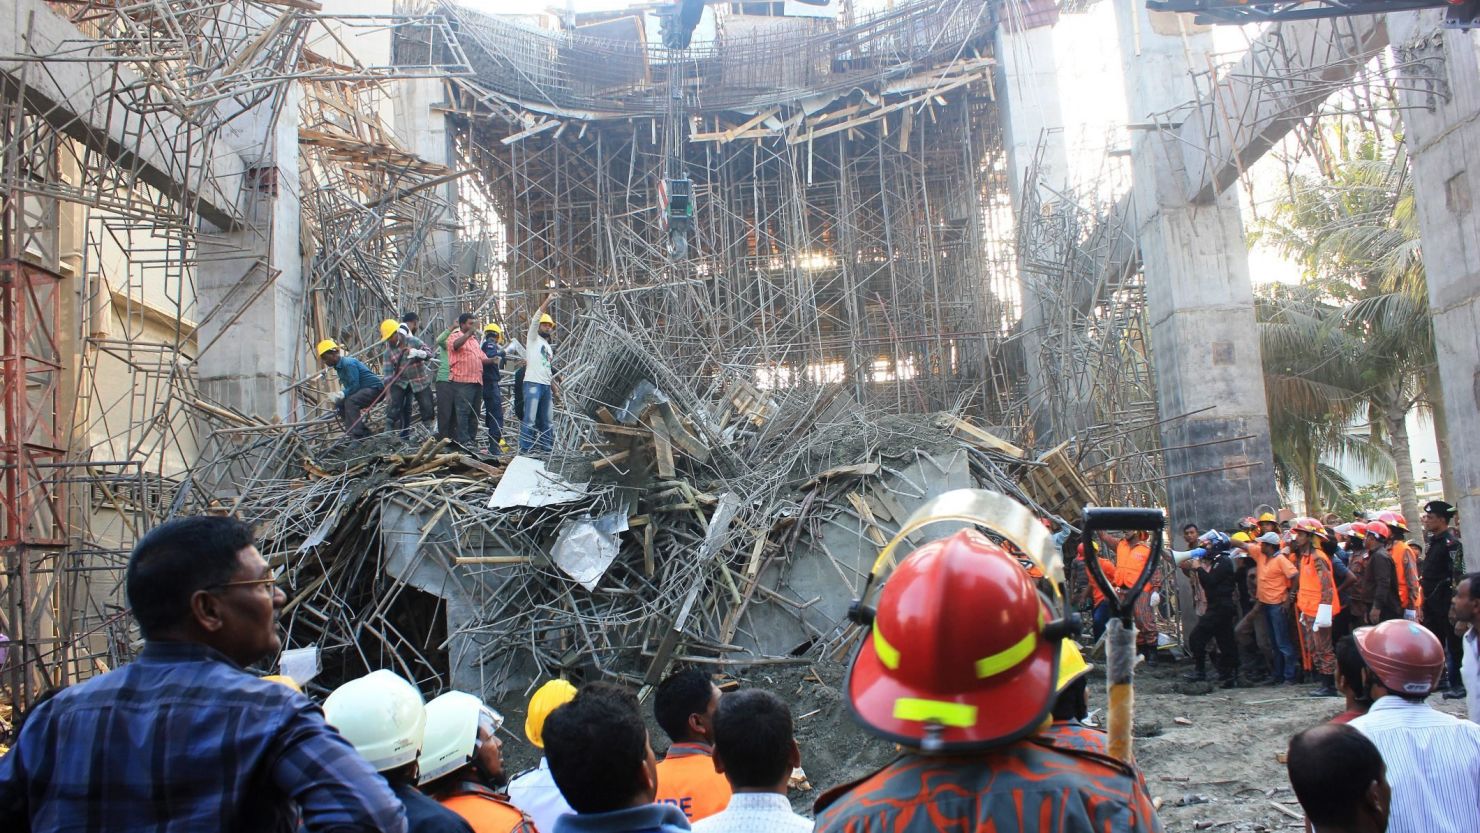 Several died and dozens were injured in the roof collapse.